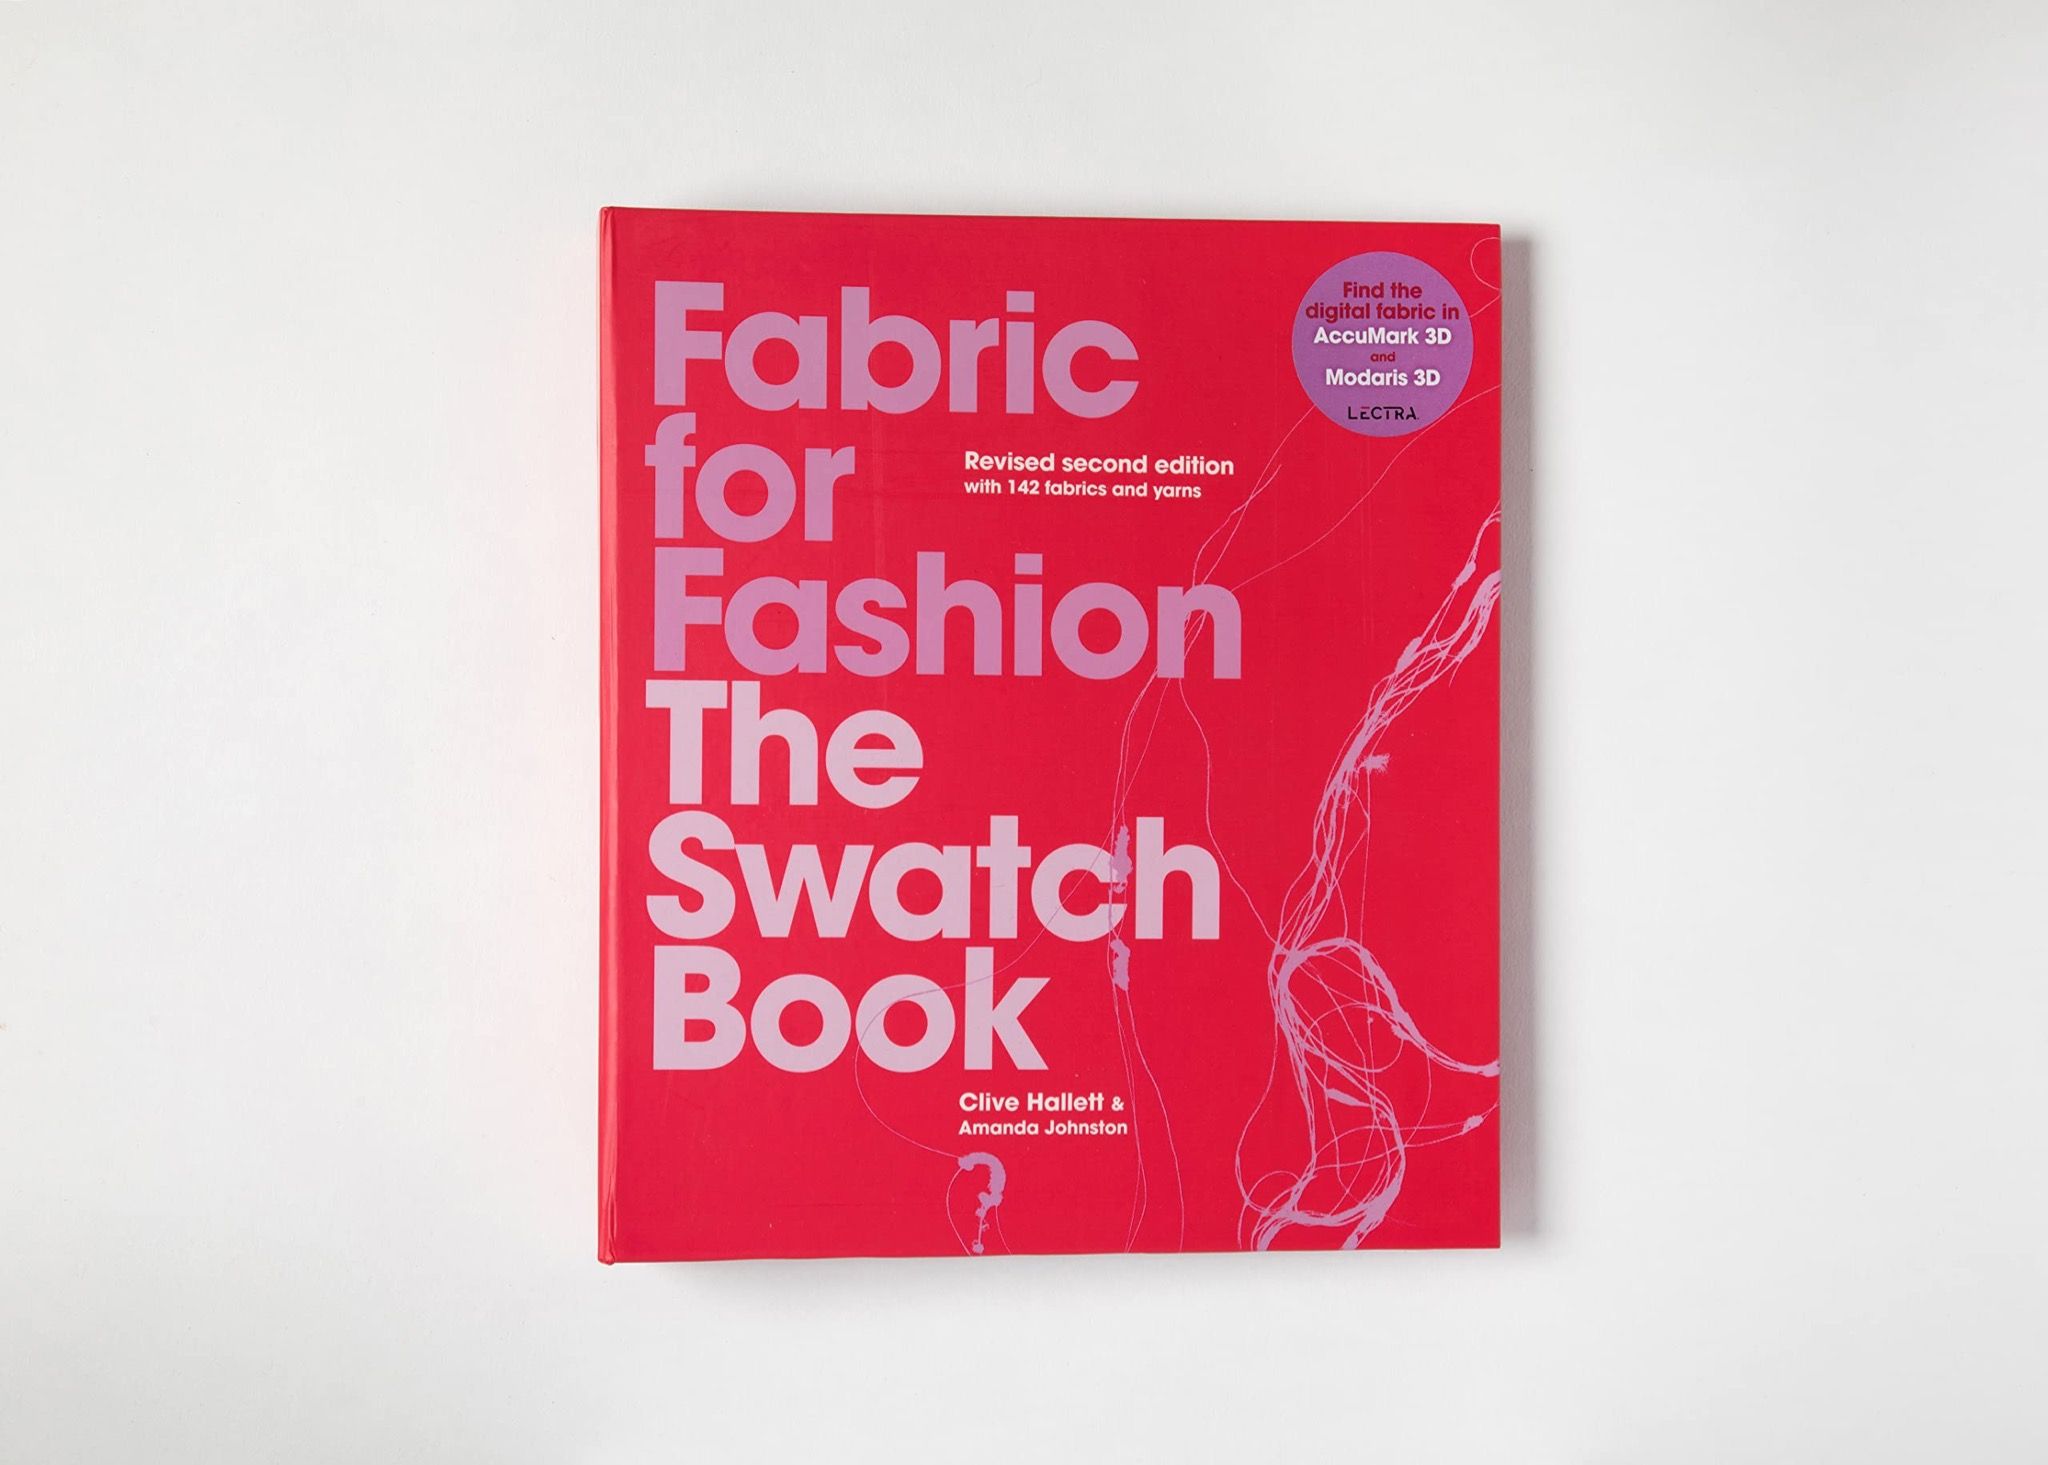  Fabric for Fashion : The Swatch Book Revised Second Edition 